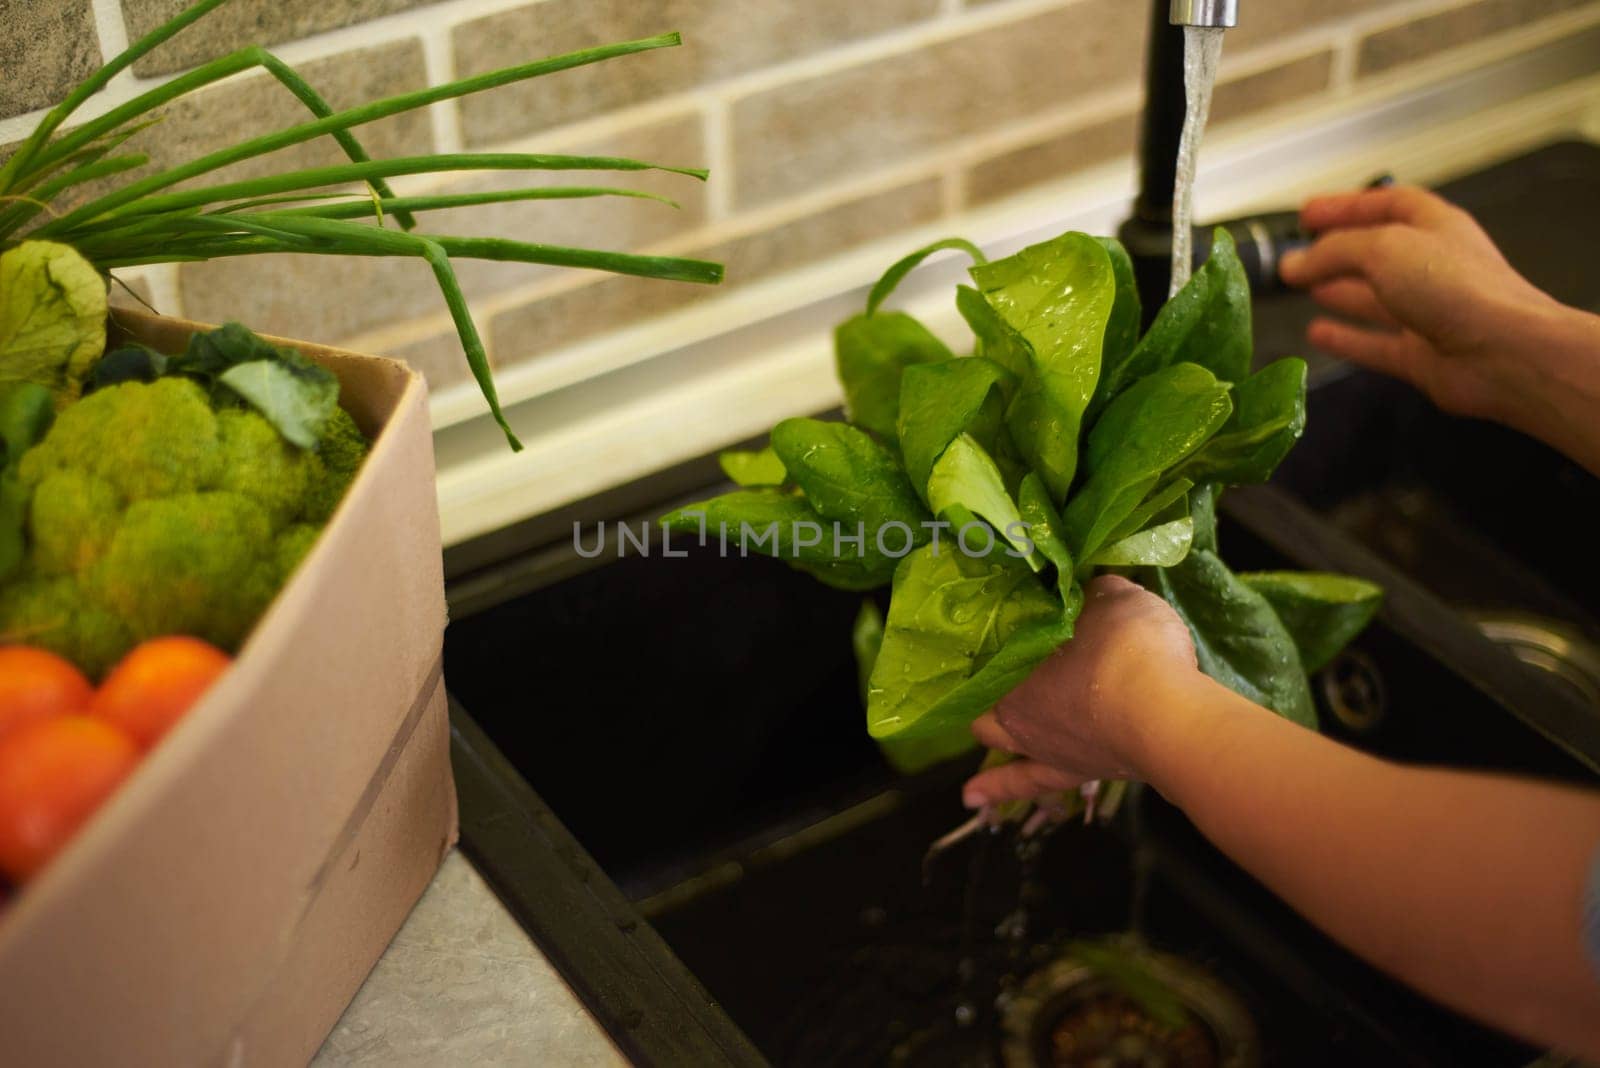 Close-up view. Details on of woman's hands washing fresh organic spinach leaves under flowing water in the kitchen sink. Healthy eating, slimming and diet concept